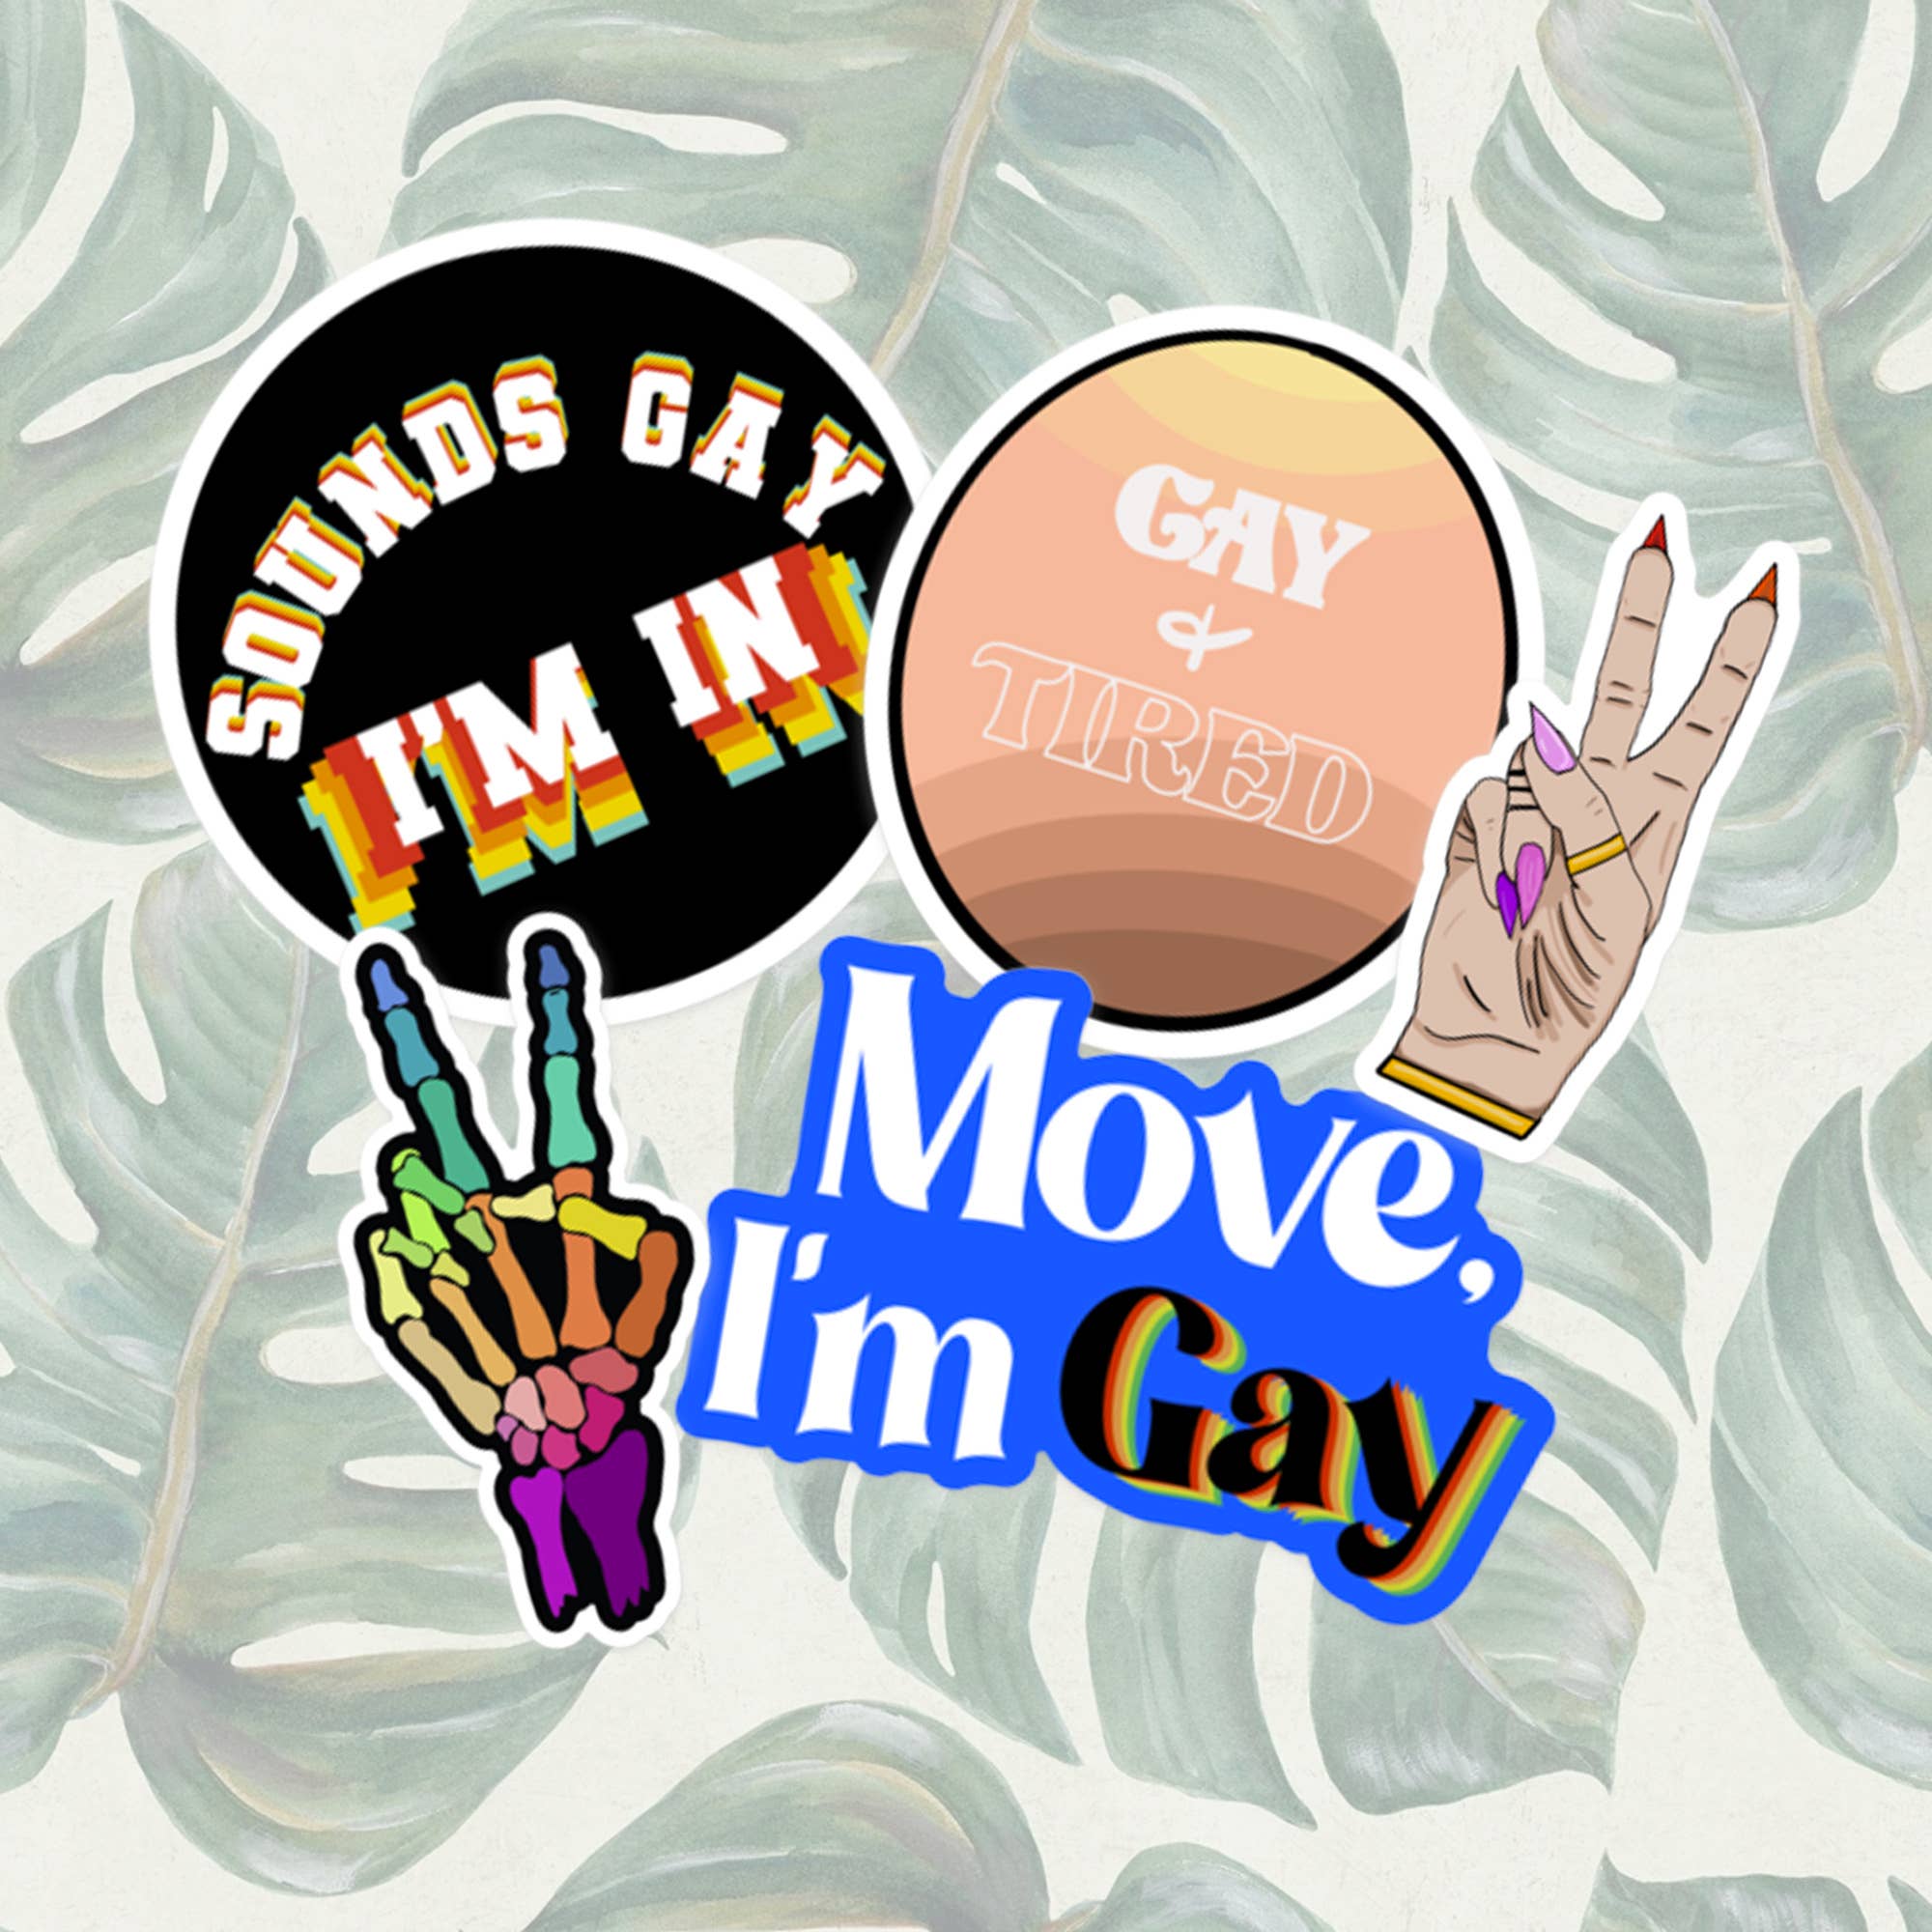 GAY MOOD STICKER PACK